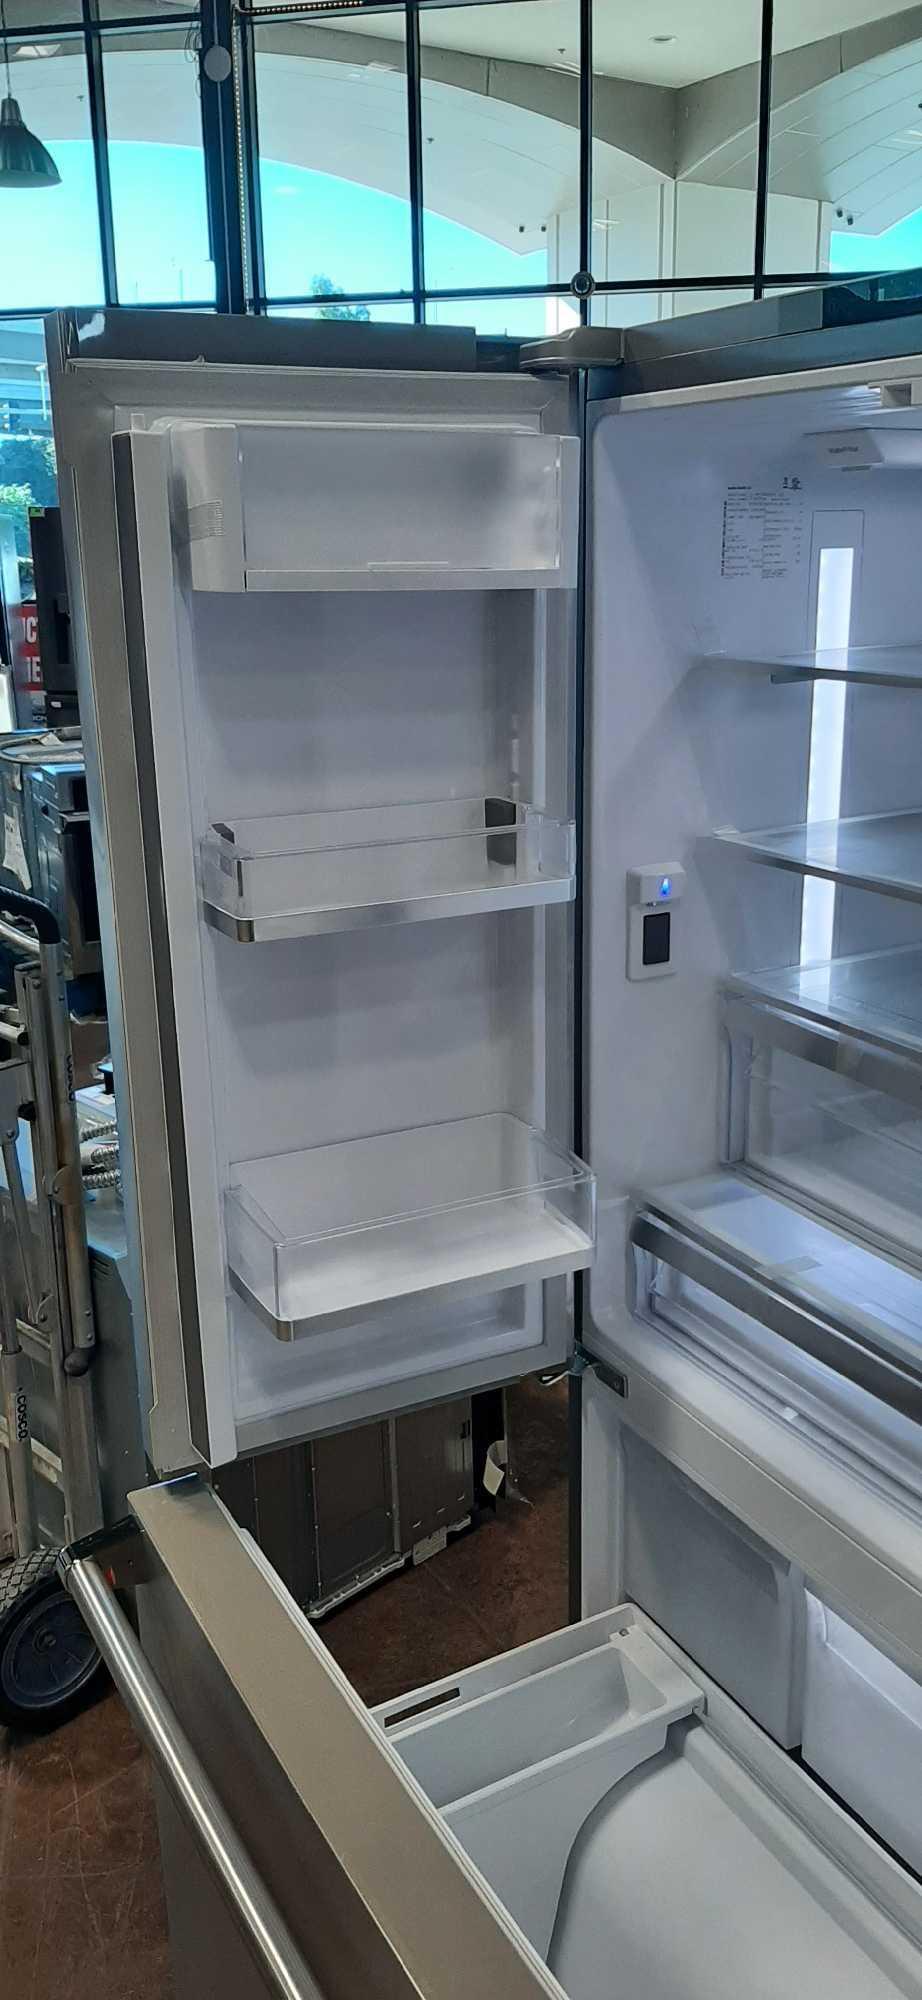 VIKING 36in. Counter Depth French Door Refrigerator*COLD*PREVIOUSLY INSTALLED*